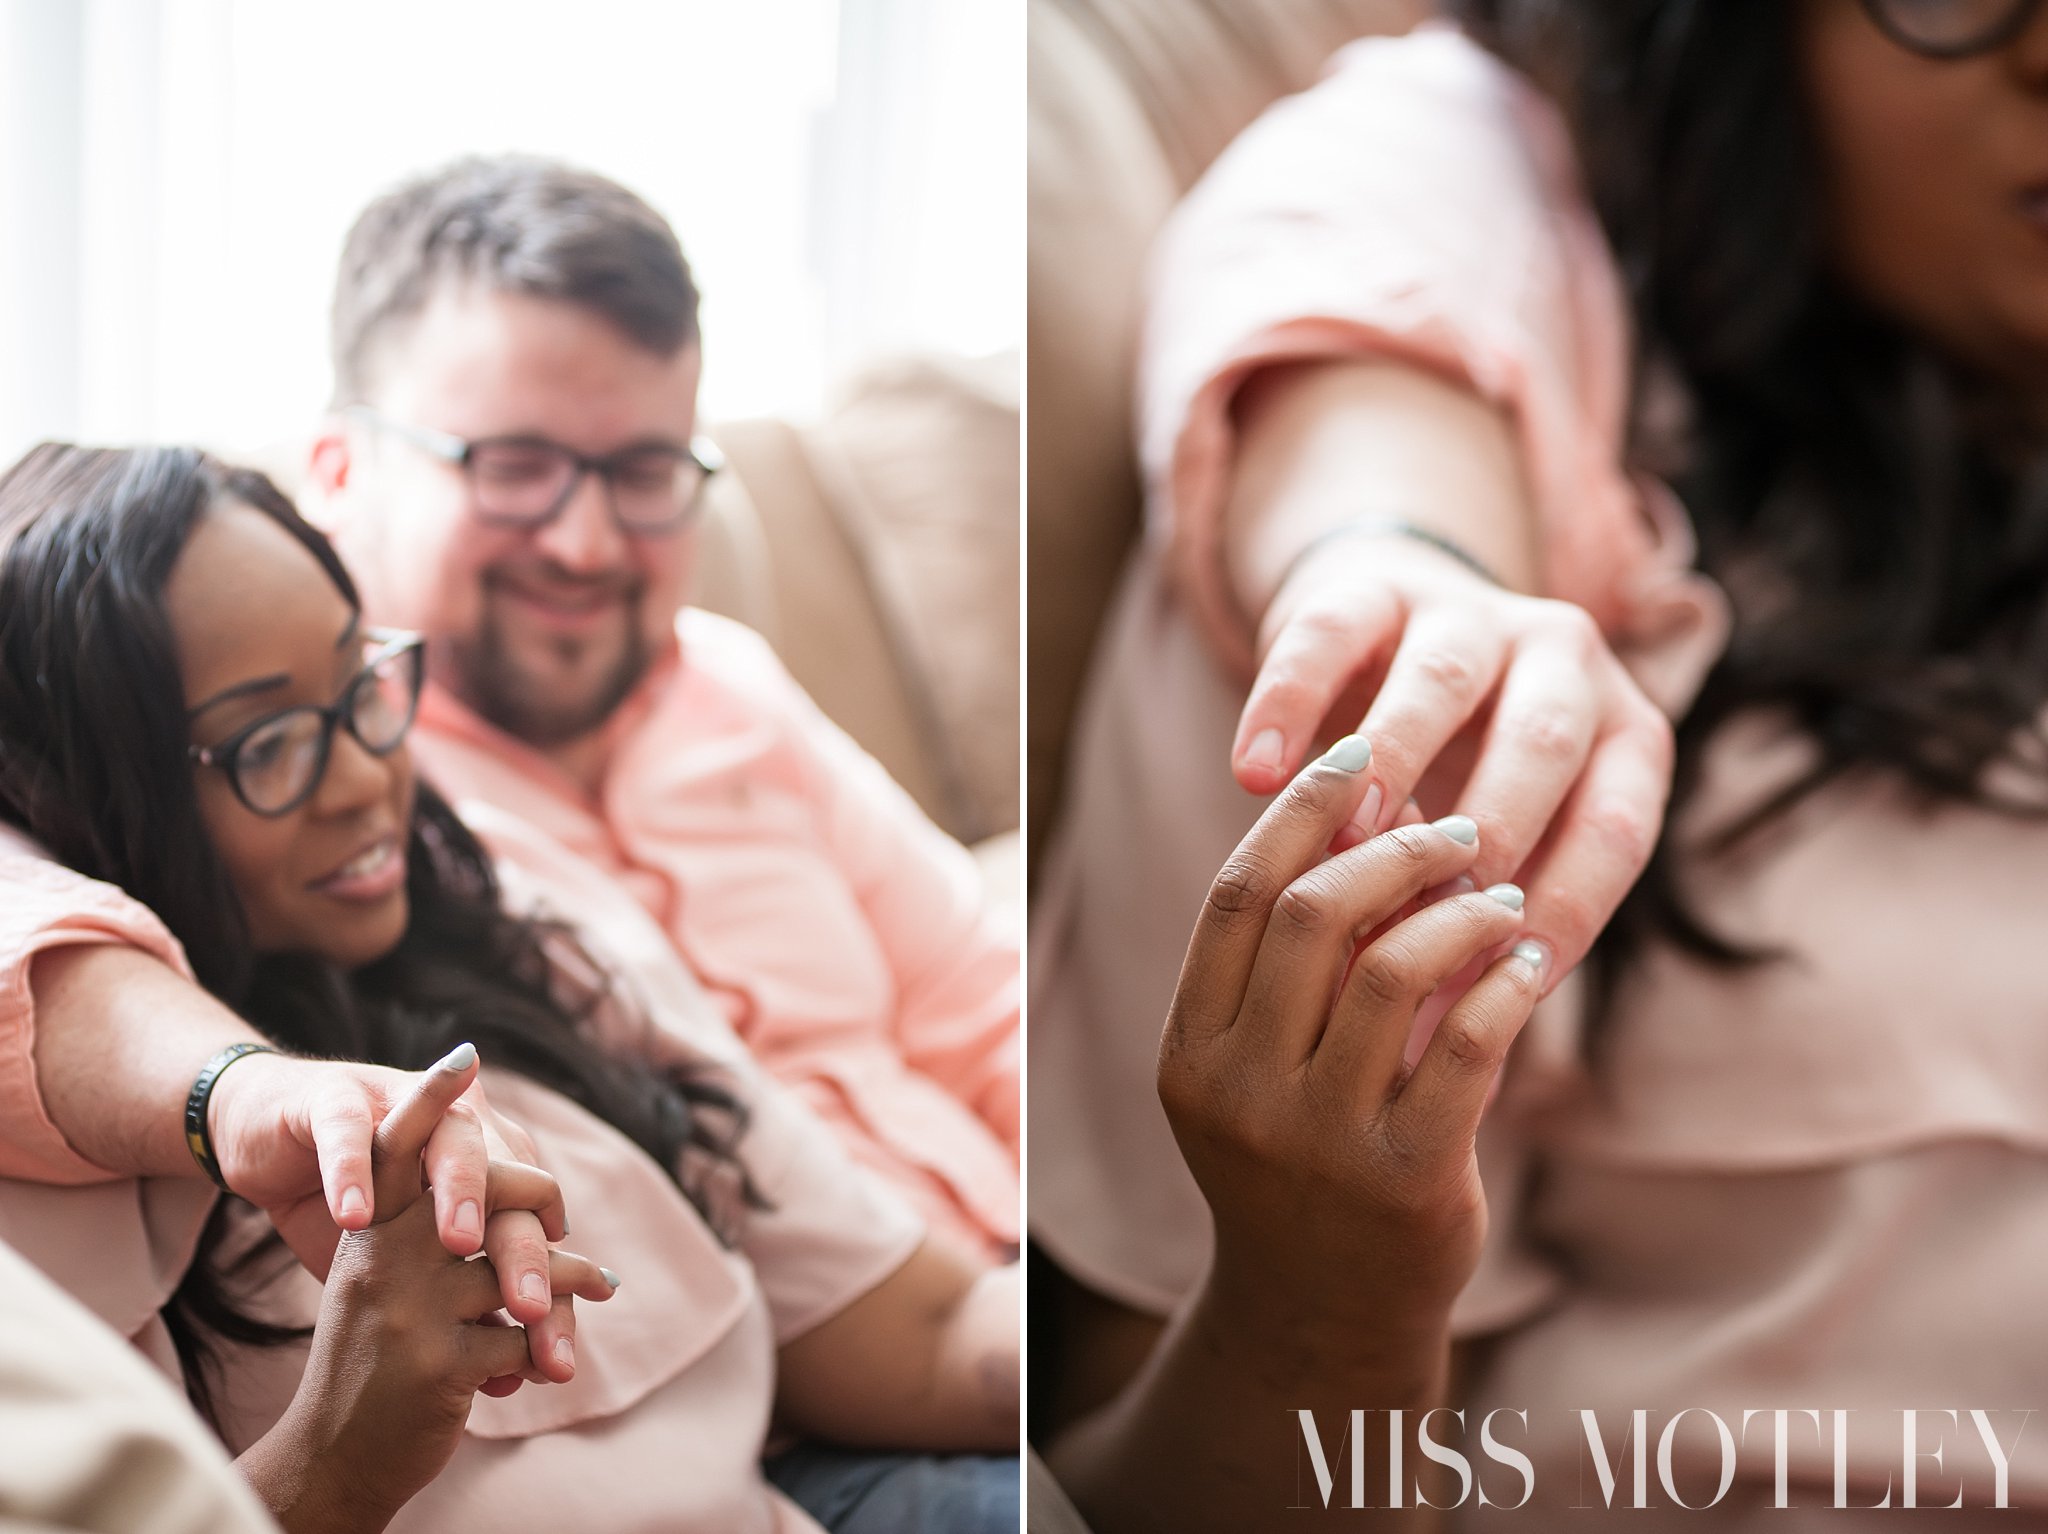   I just love when he holds my hand and how much bigger than mine they are. I feel like my hand was made to perfectly fit inside of his… We were destined to be together. ~RaSheila   